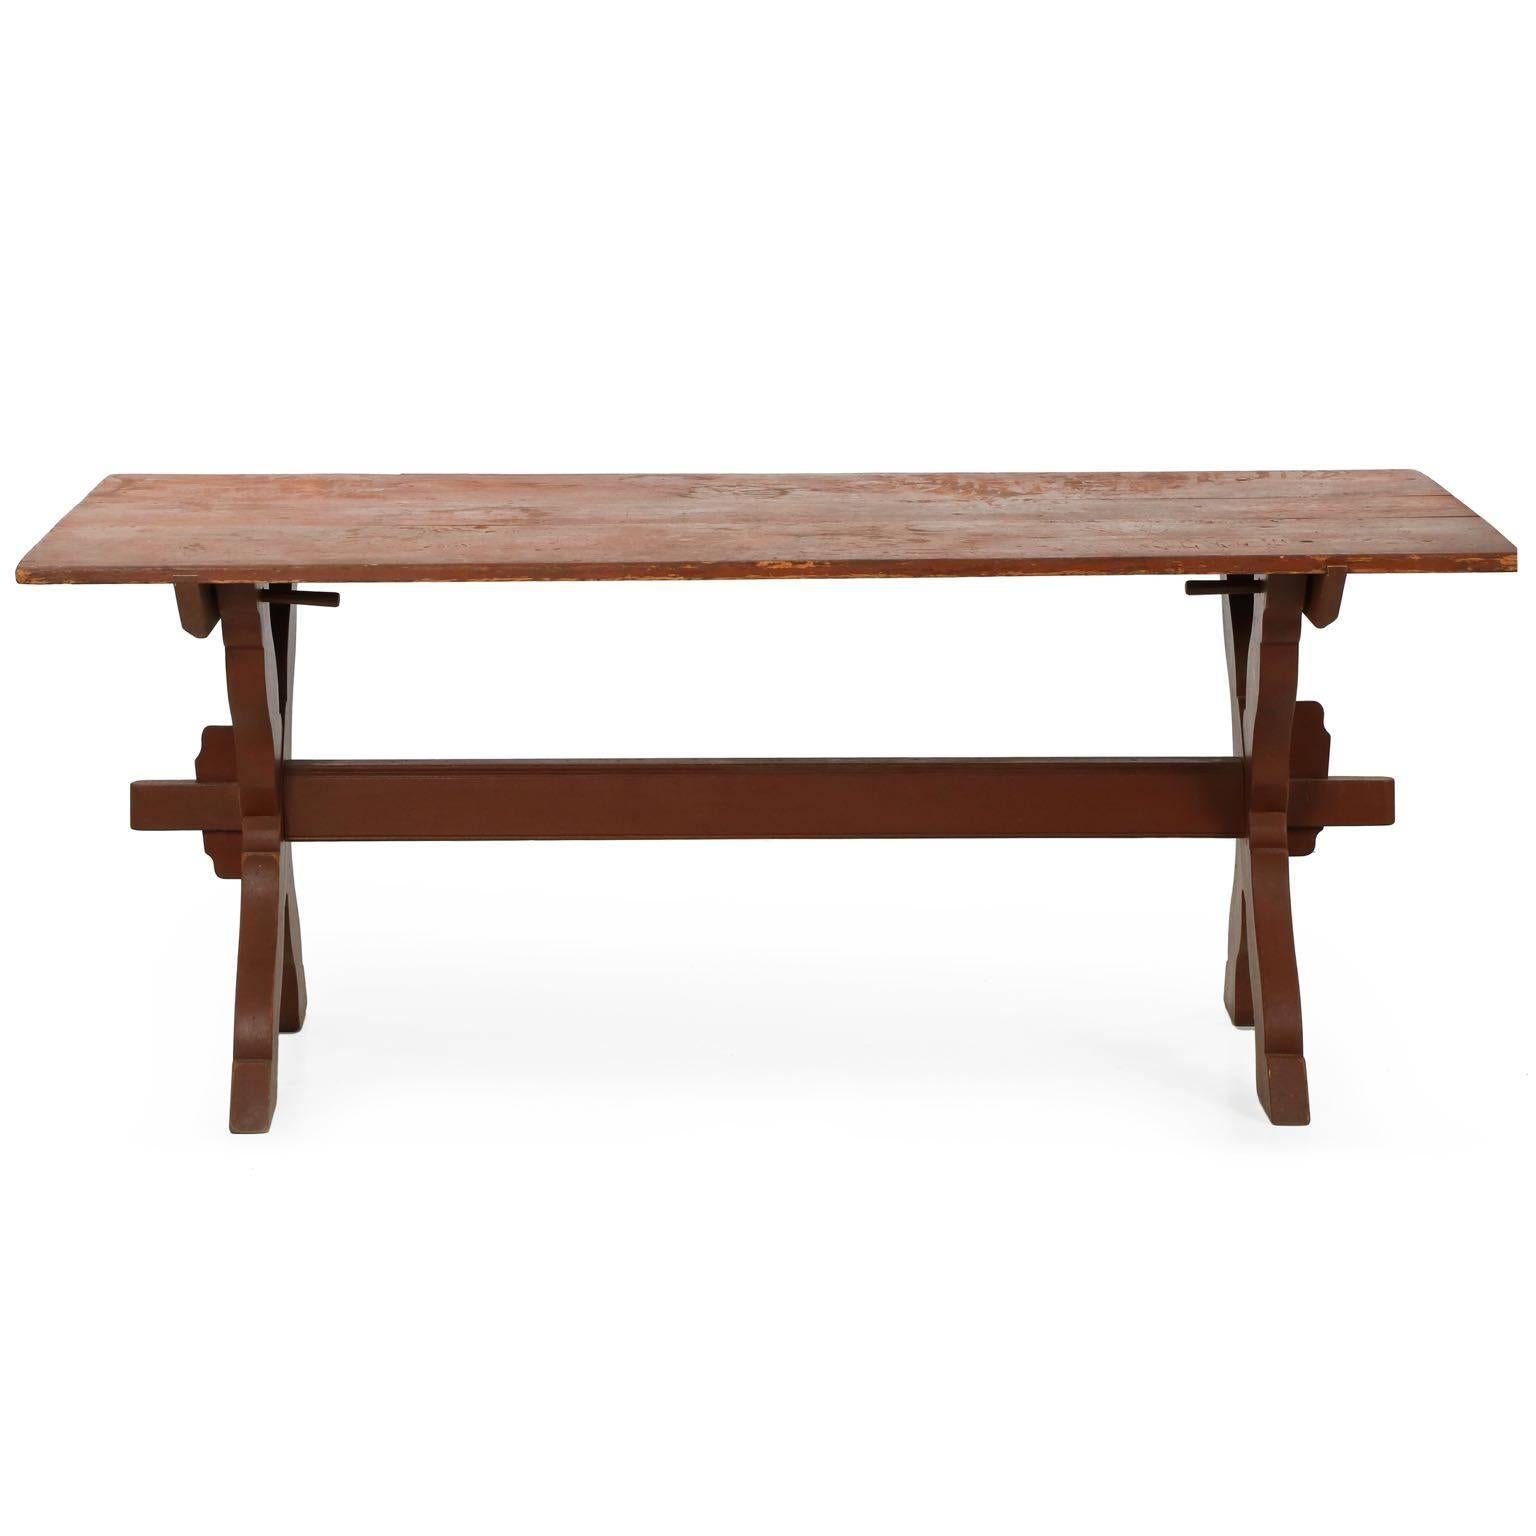 This handcrafted trestle table is a clean and simple design, the entire table breaking down for easy movement and storage. Each X-form leg separates into two pieces, the single stretcher joining through these with a long tenon that projects through